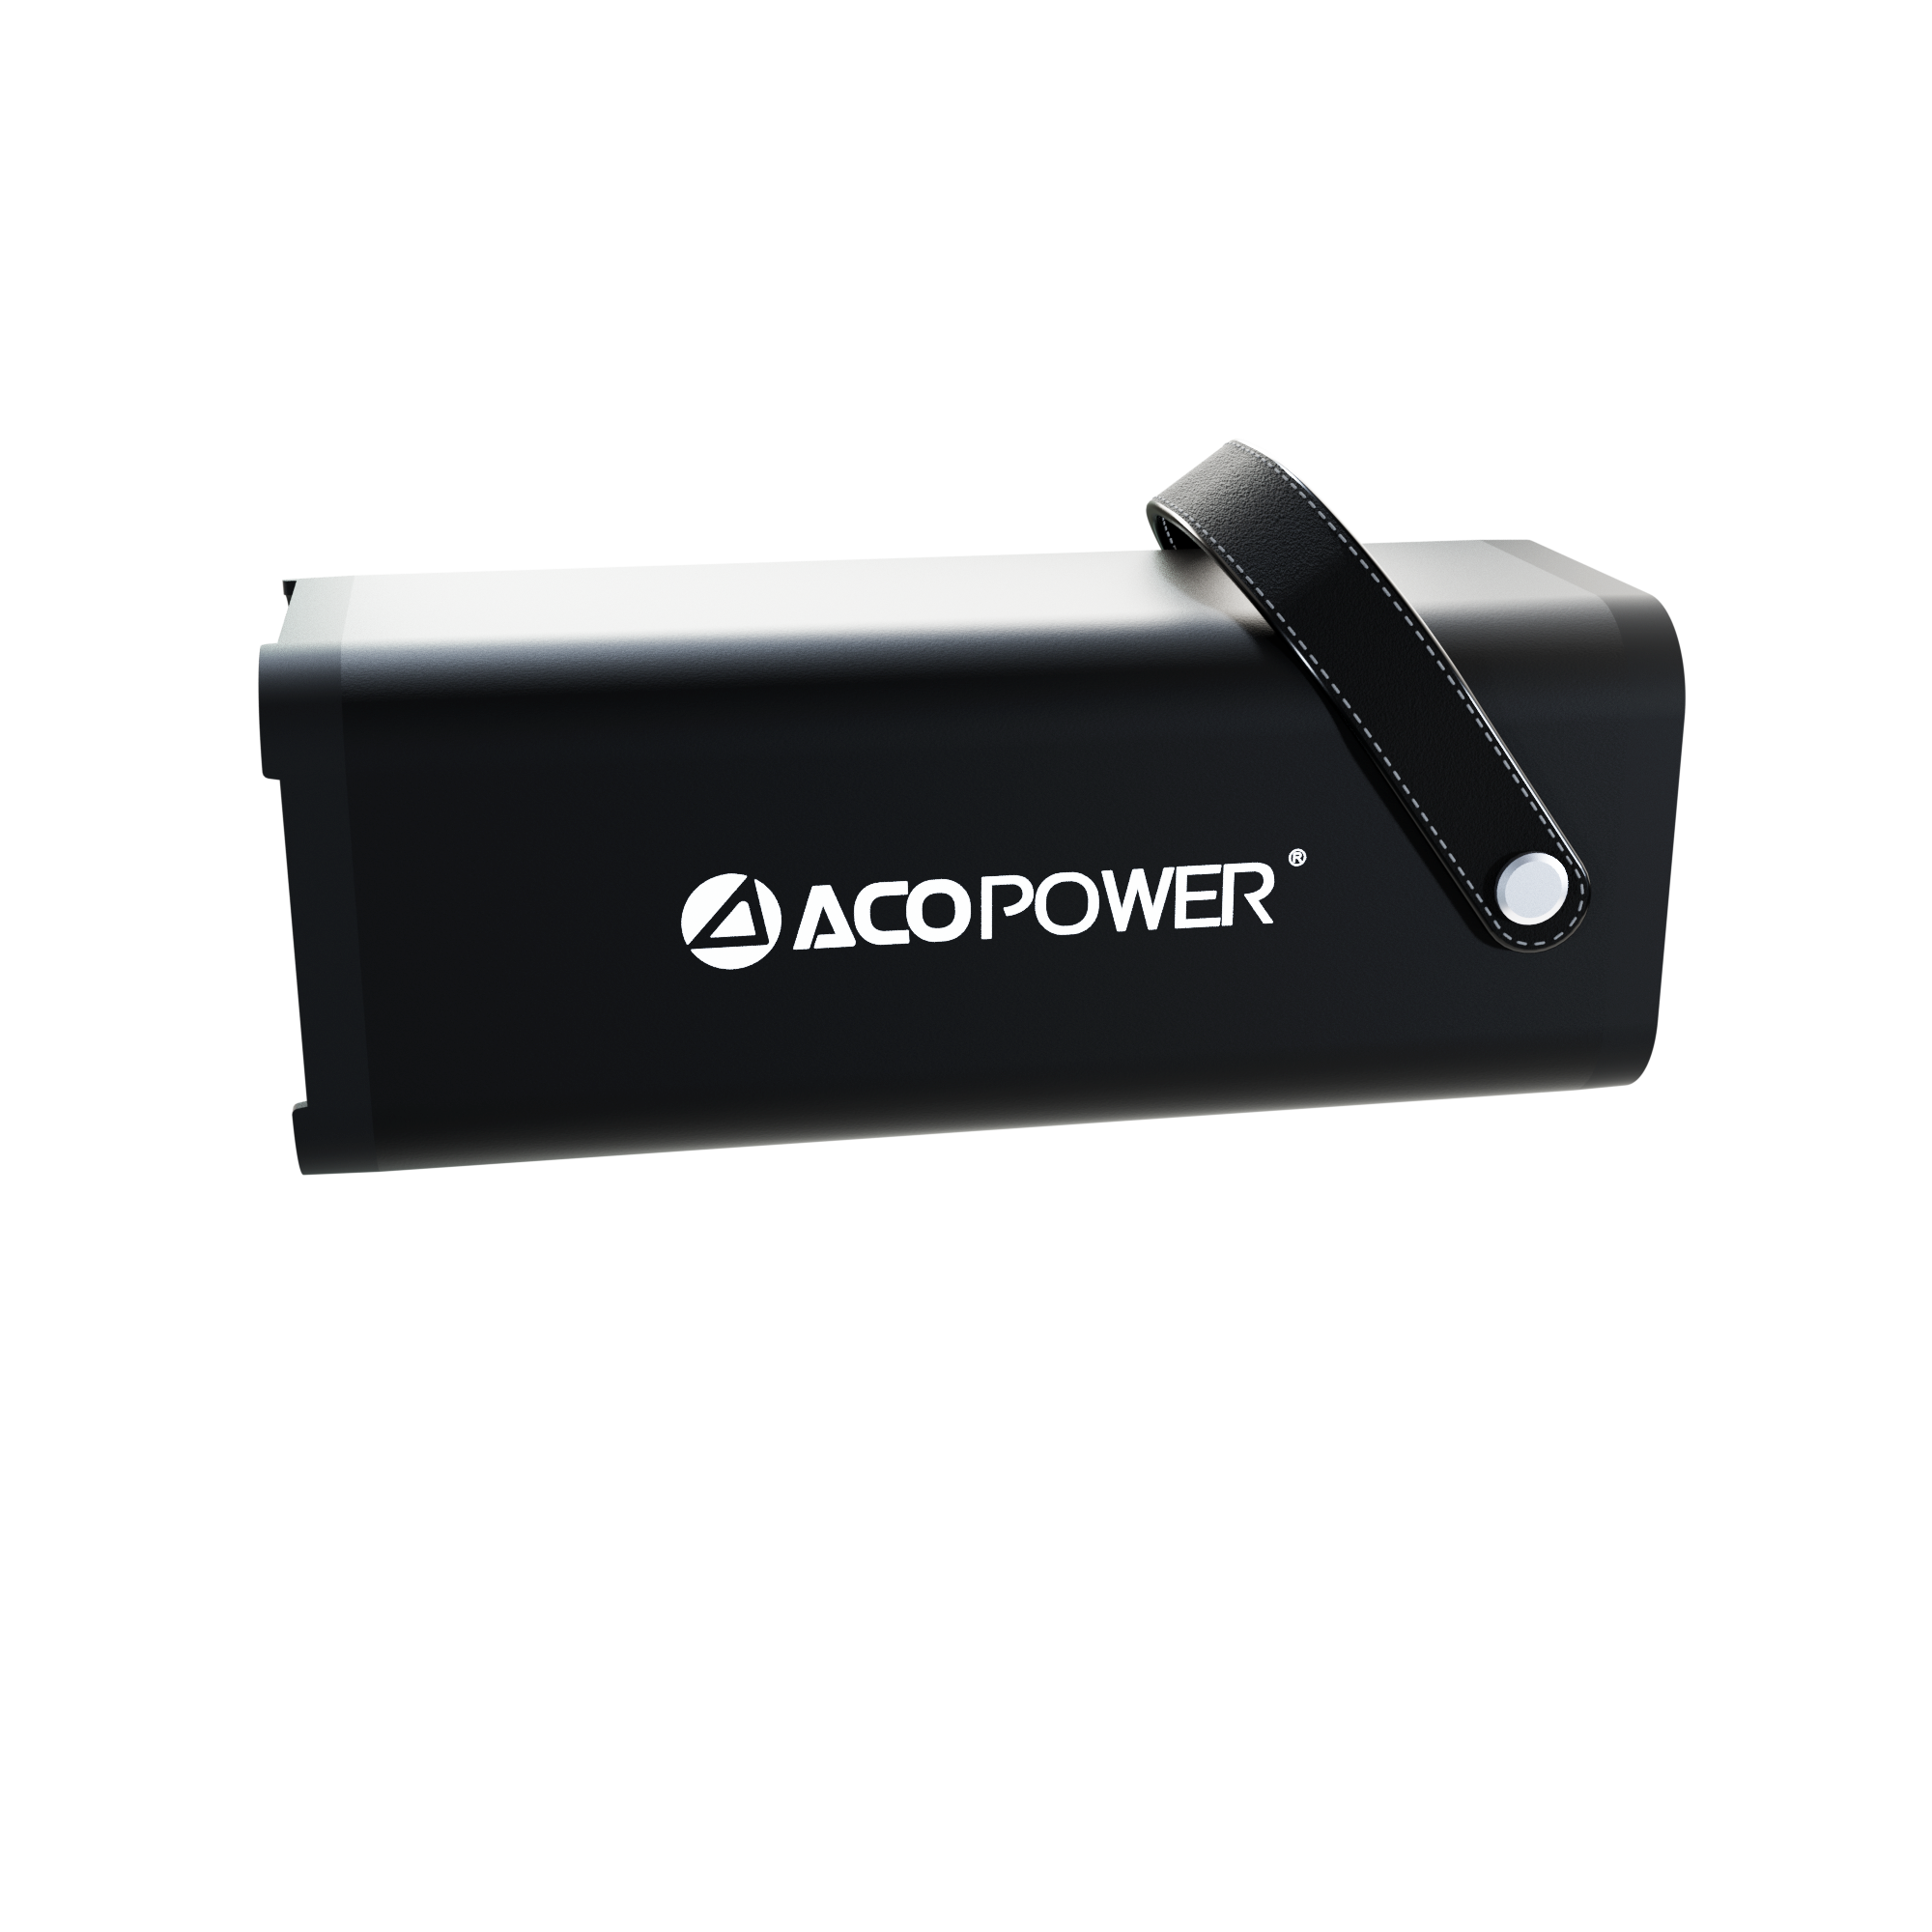 ACOPOWER PS100 Power Station, 154Wh Portable Solar Generator, 110V/200W AC Outlet